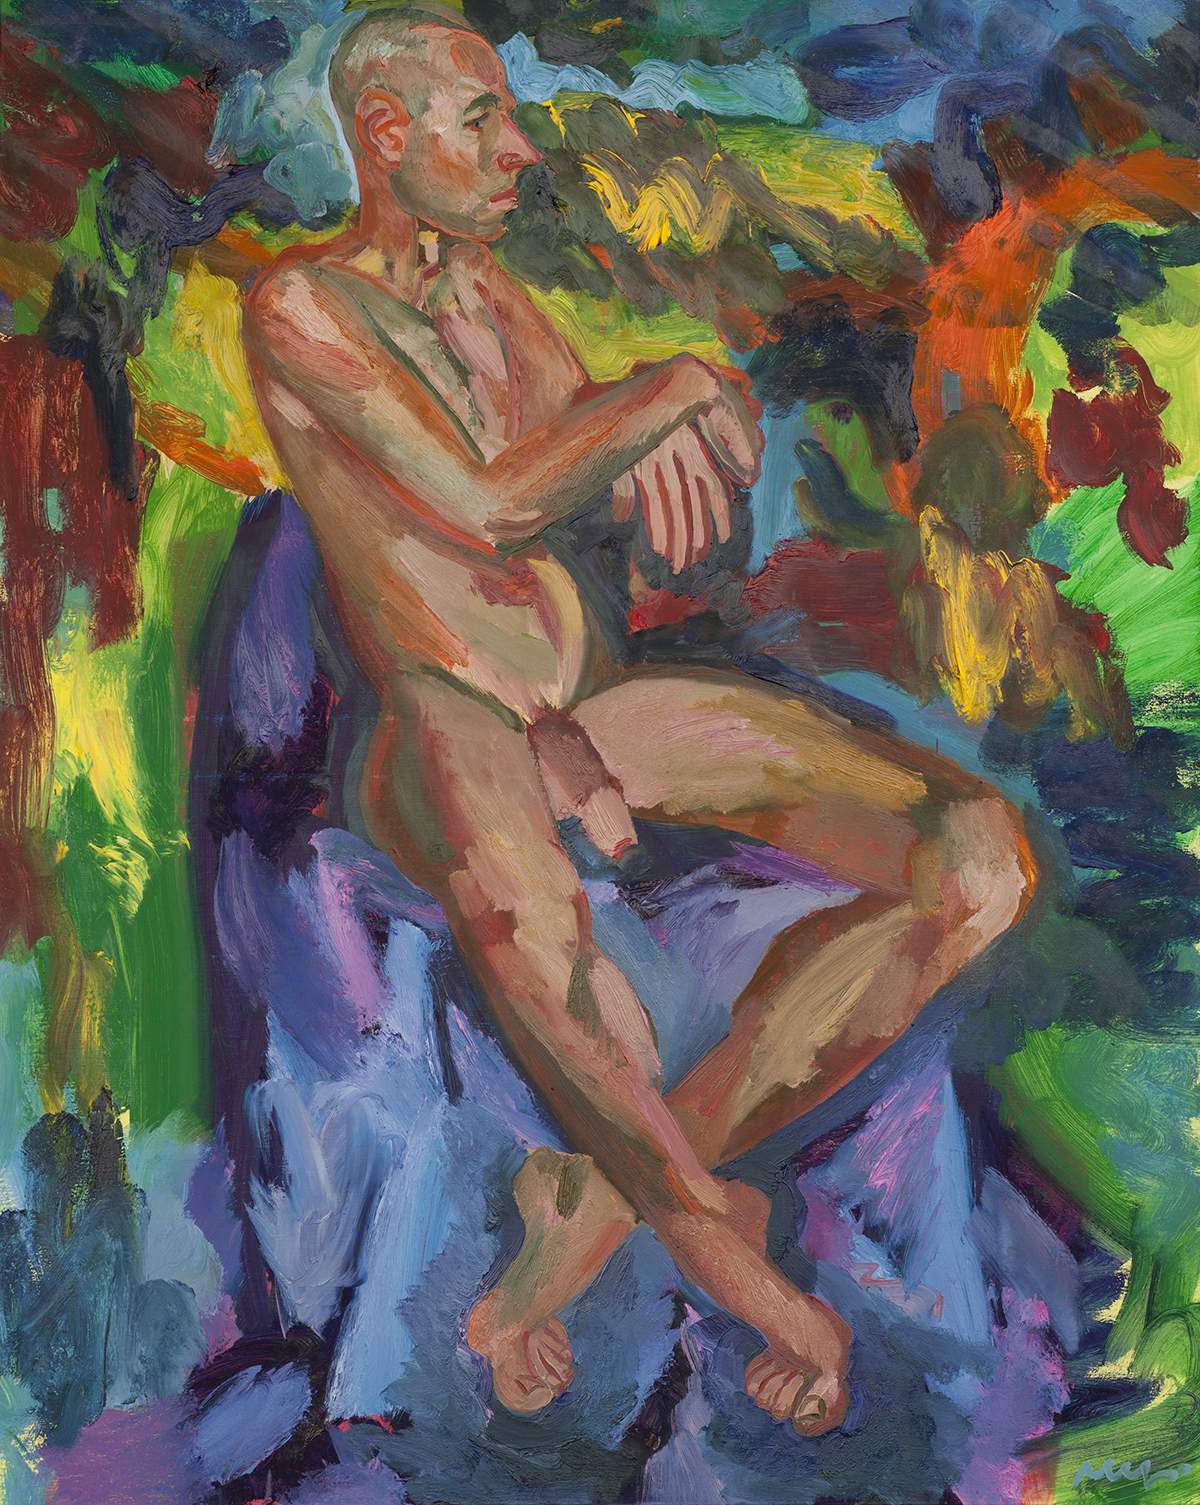 Seated Male Model, Oil on Canvas, 100x80 cm. 2019